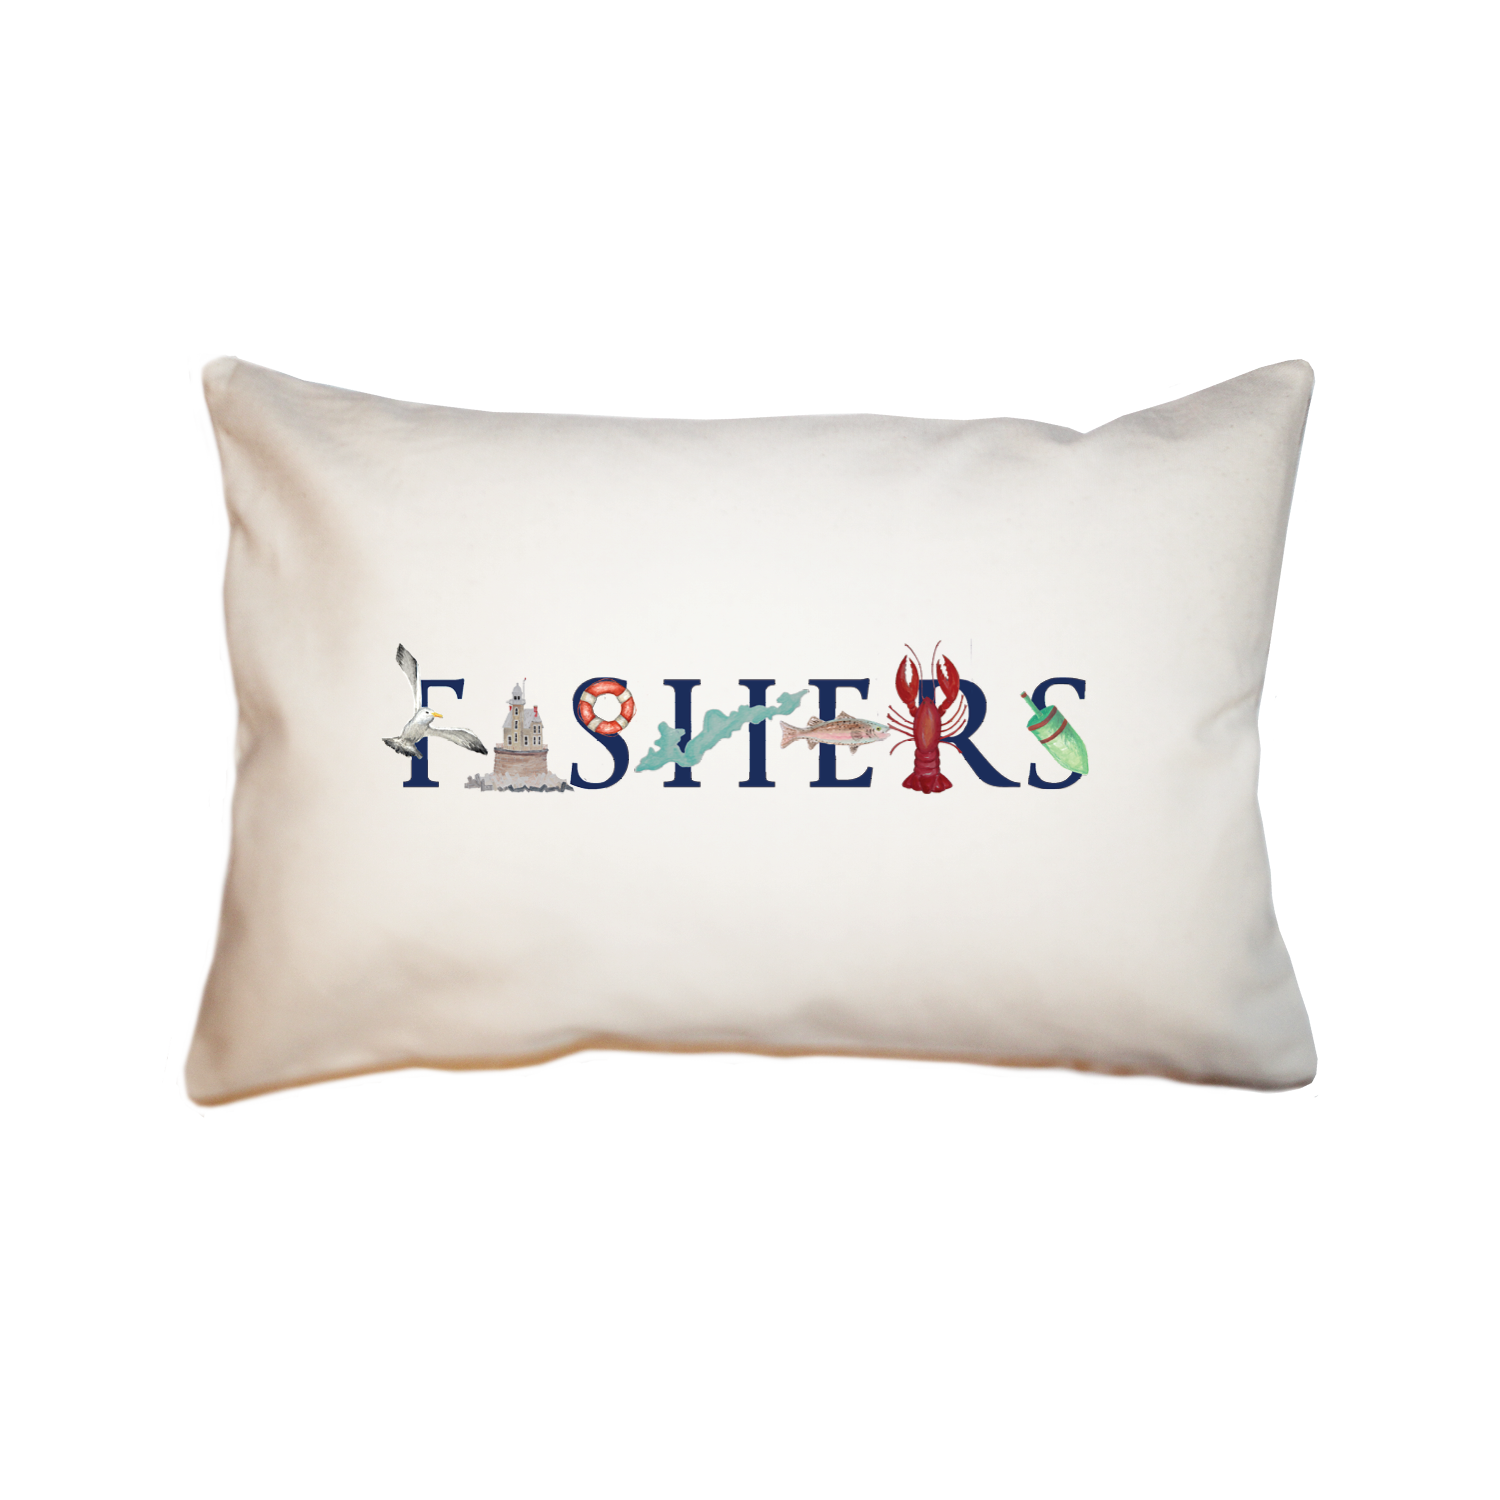 Fishers large rectangle pillow